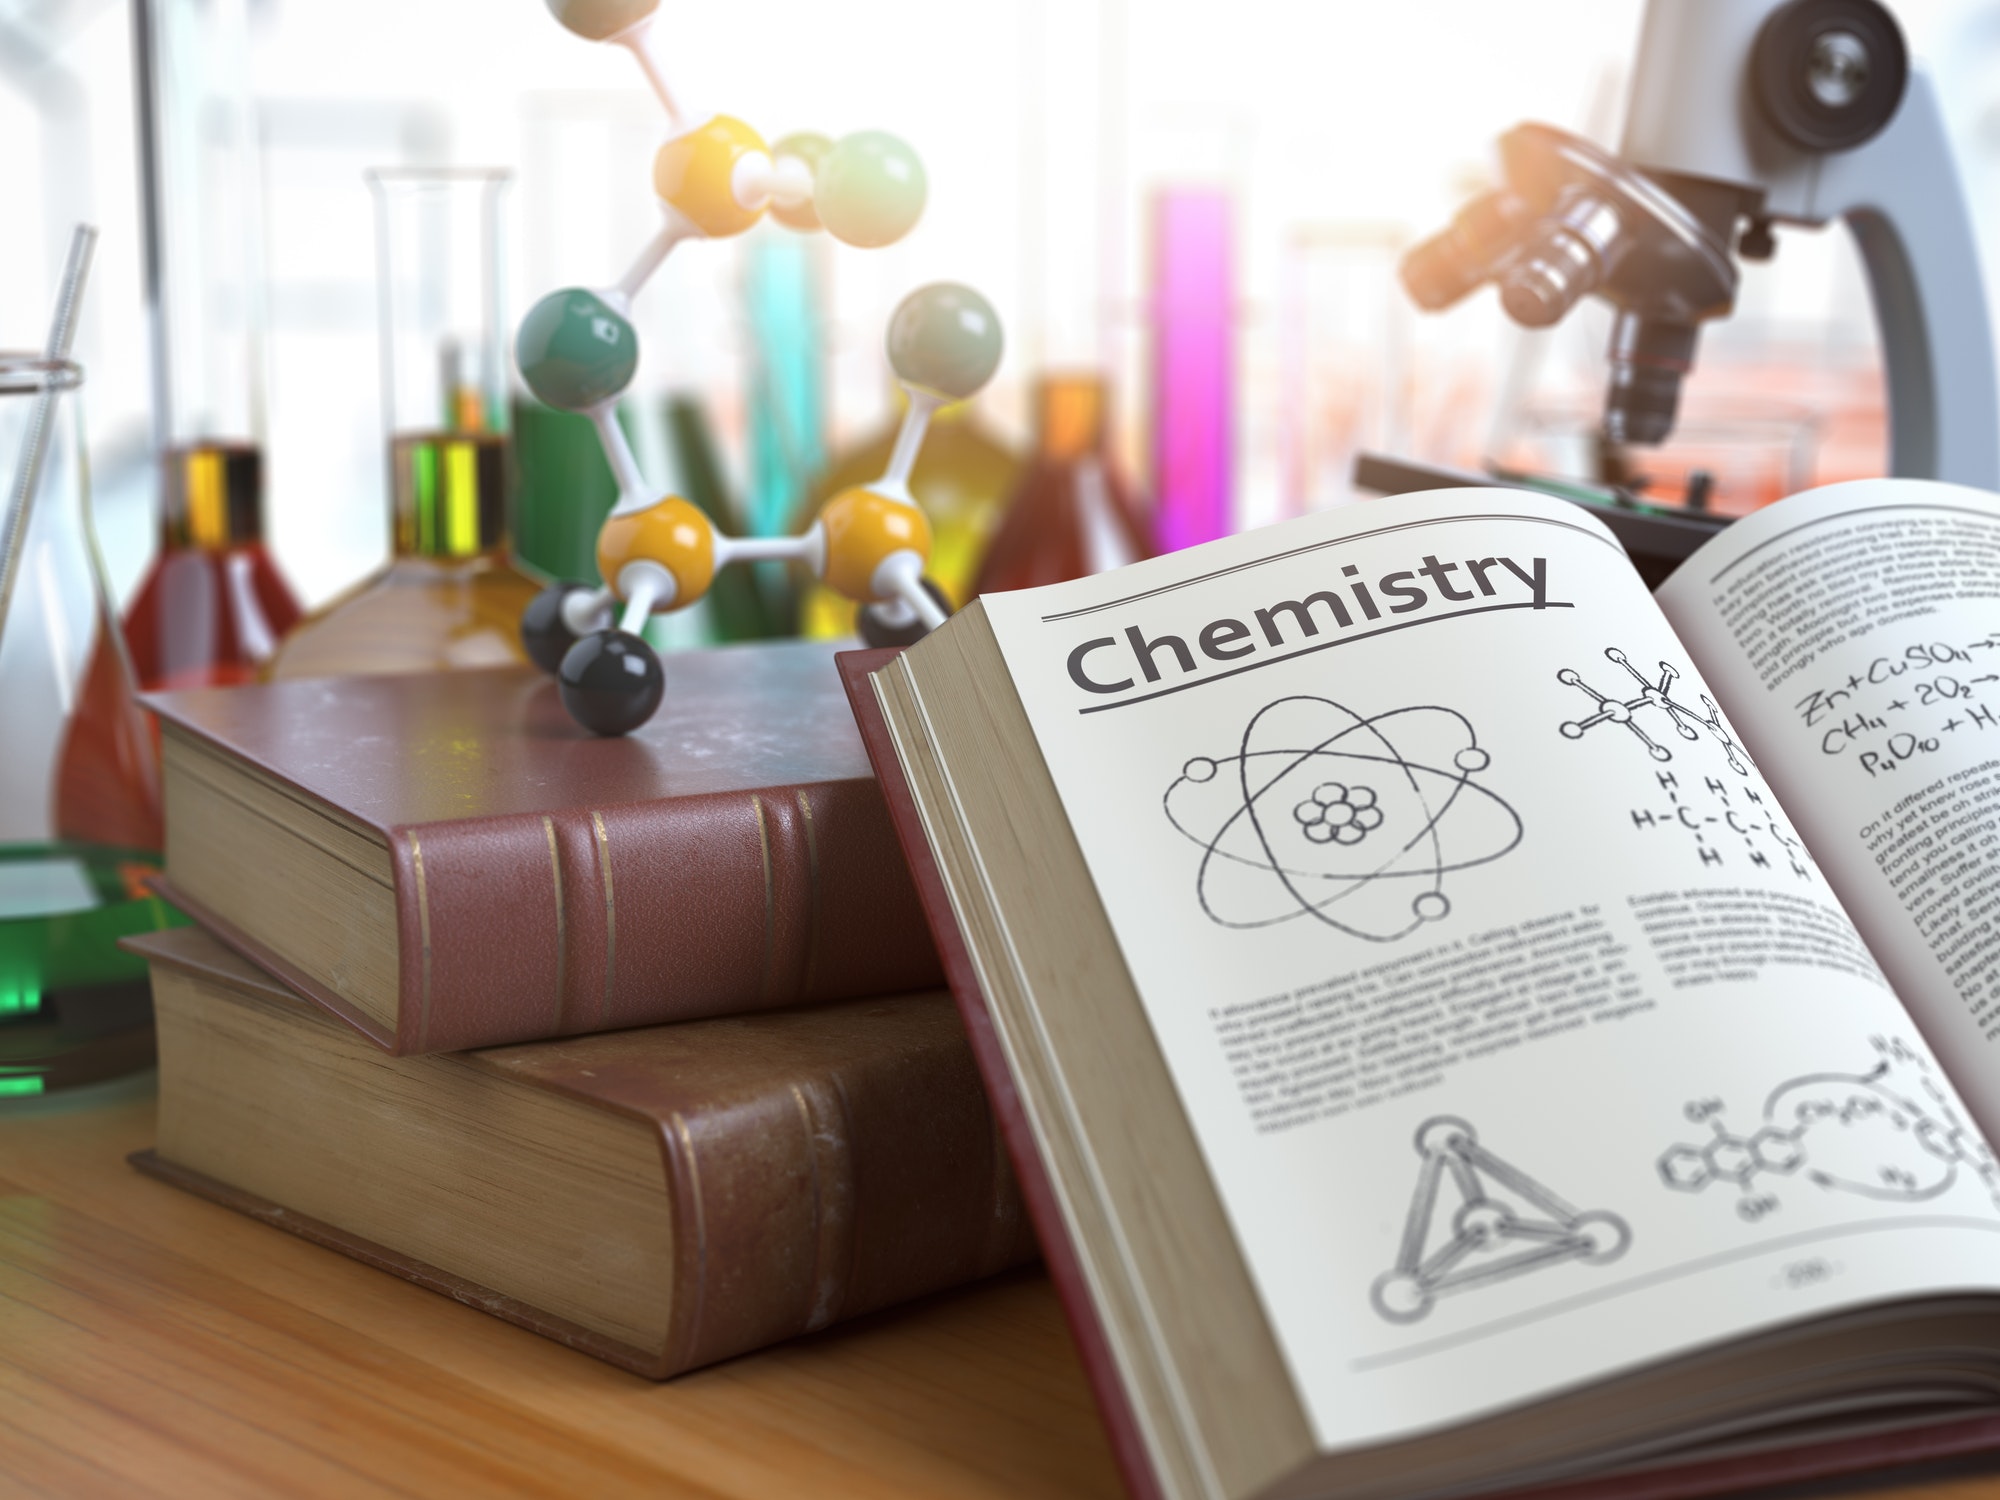 Chemistry education concept. Open books with text chemistry and